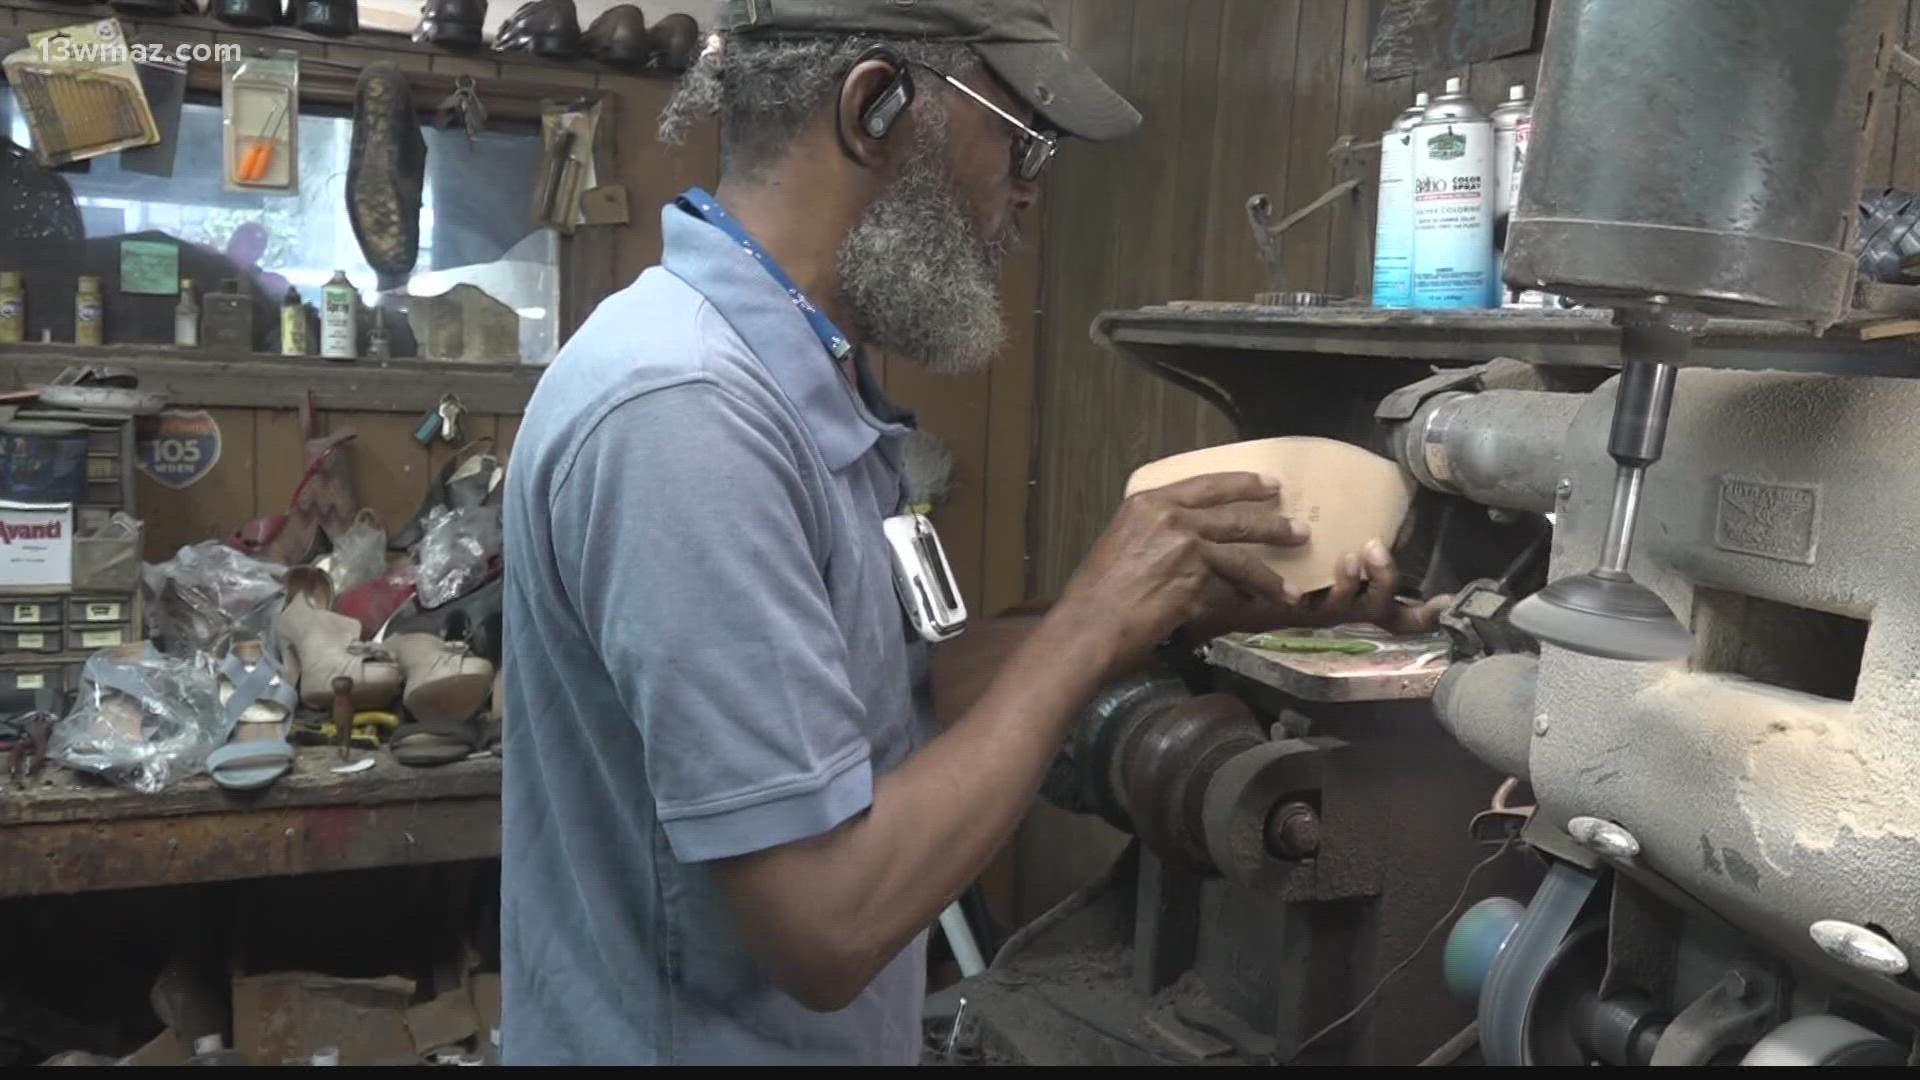 Mallary McClendon has owned West End Shoe Shop in Macon for more than three decades.